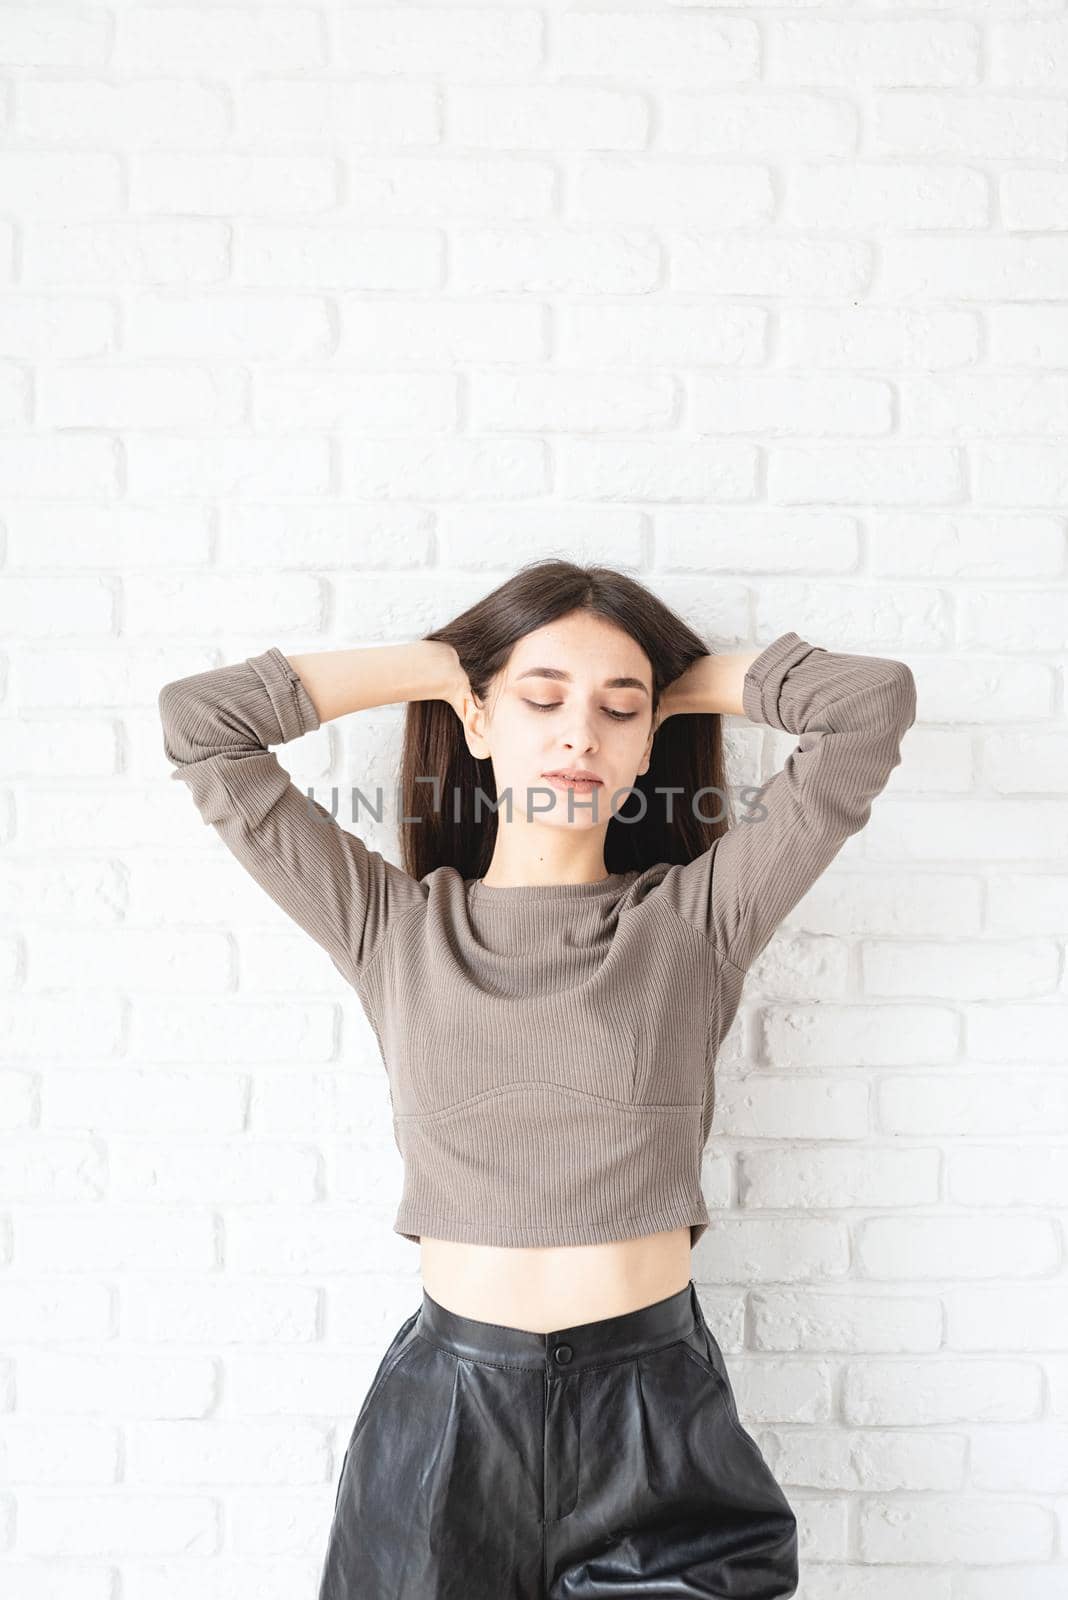 Three quarters length portrait of beautiful smiling brunette woman with long hair wearing brown shirt and black leather shorts, on white brick wall background